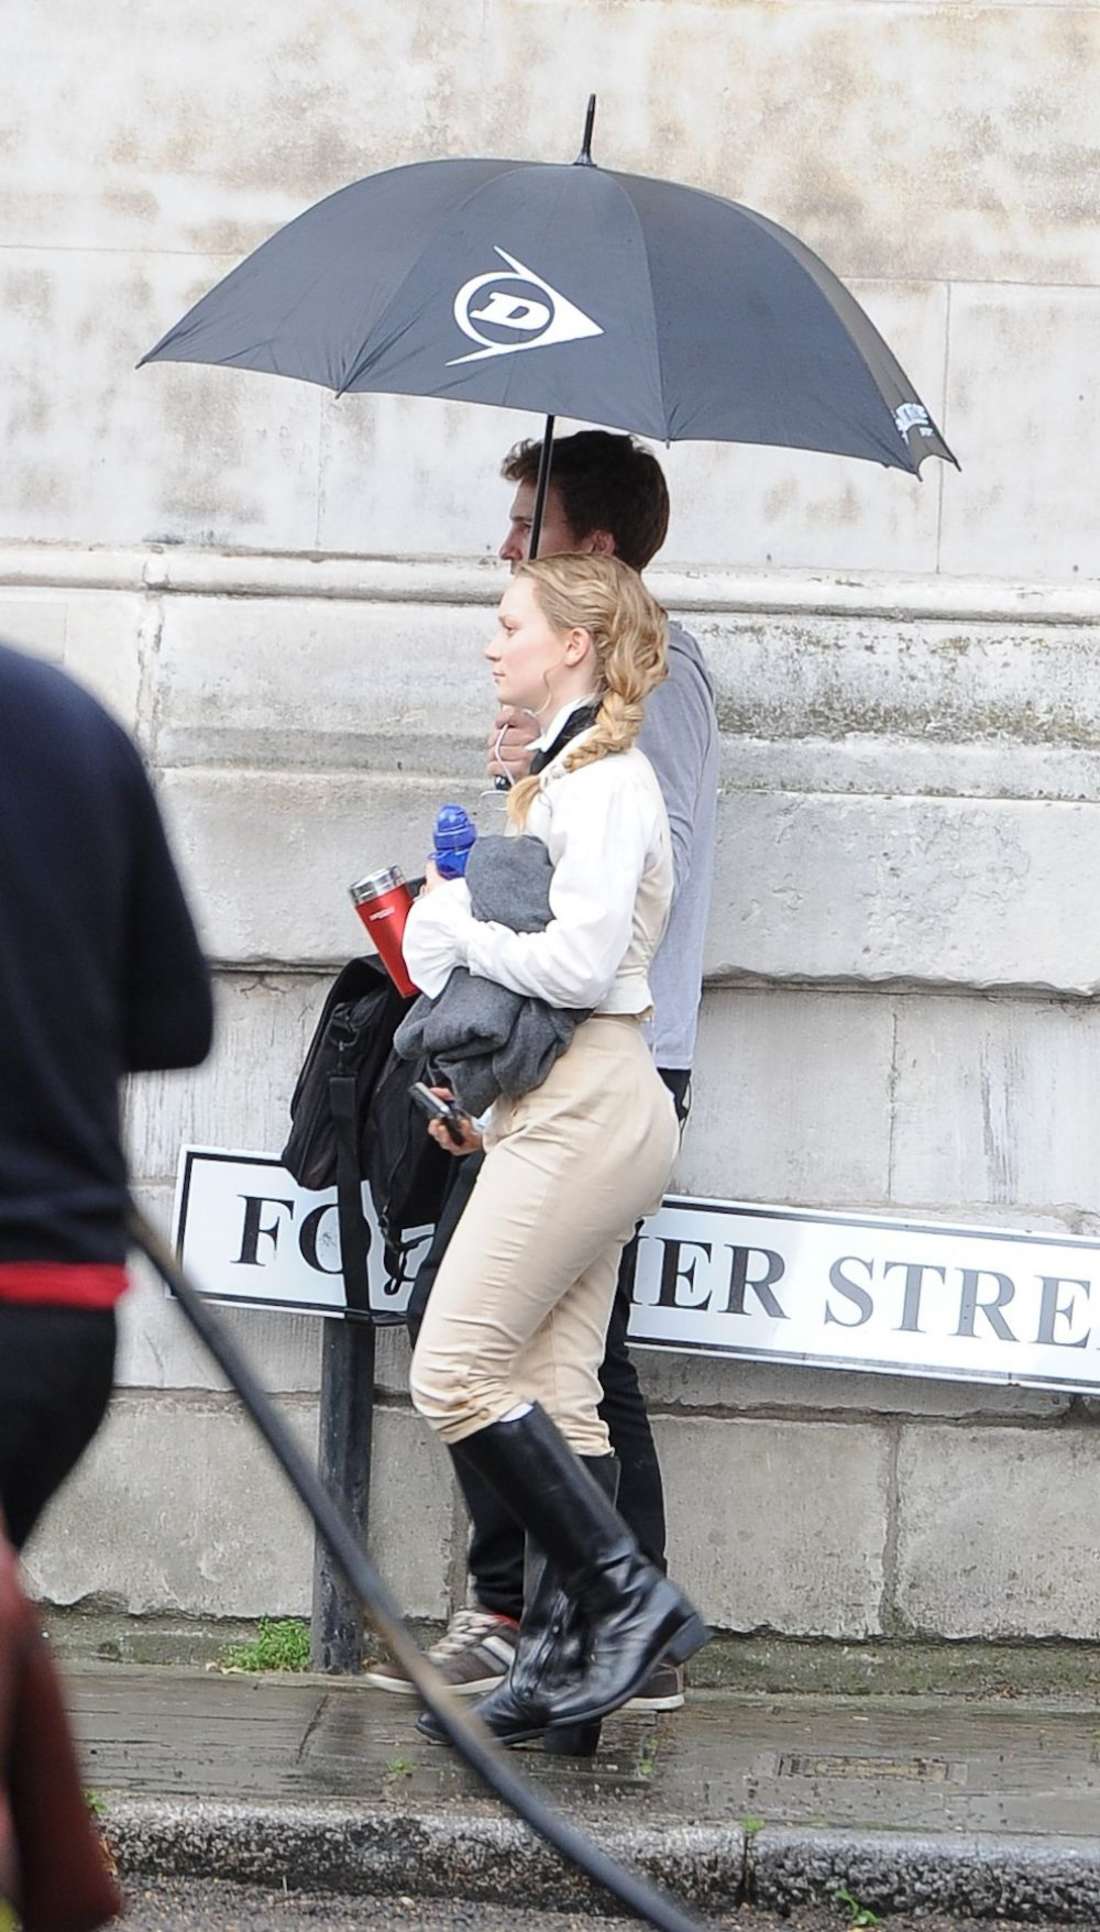 Mia Wasikowska on the Set of Alice in Wonderland Through the Looking Glass in Surrey